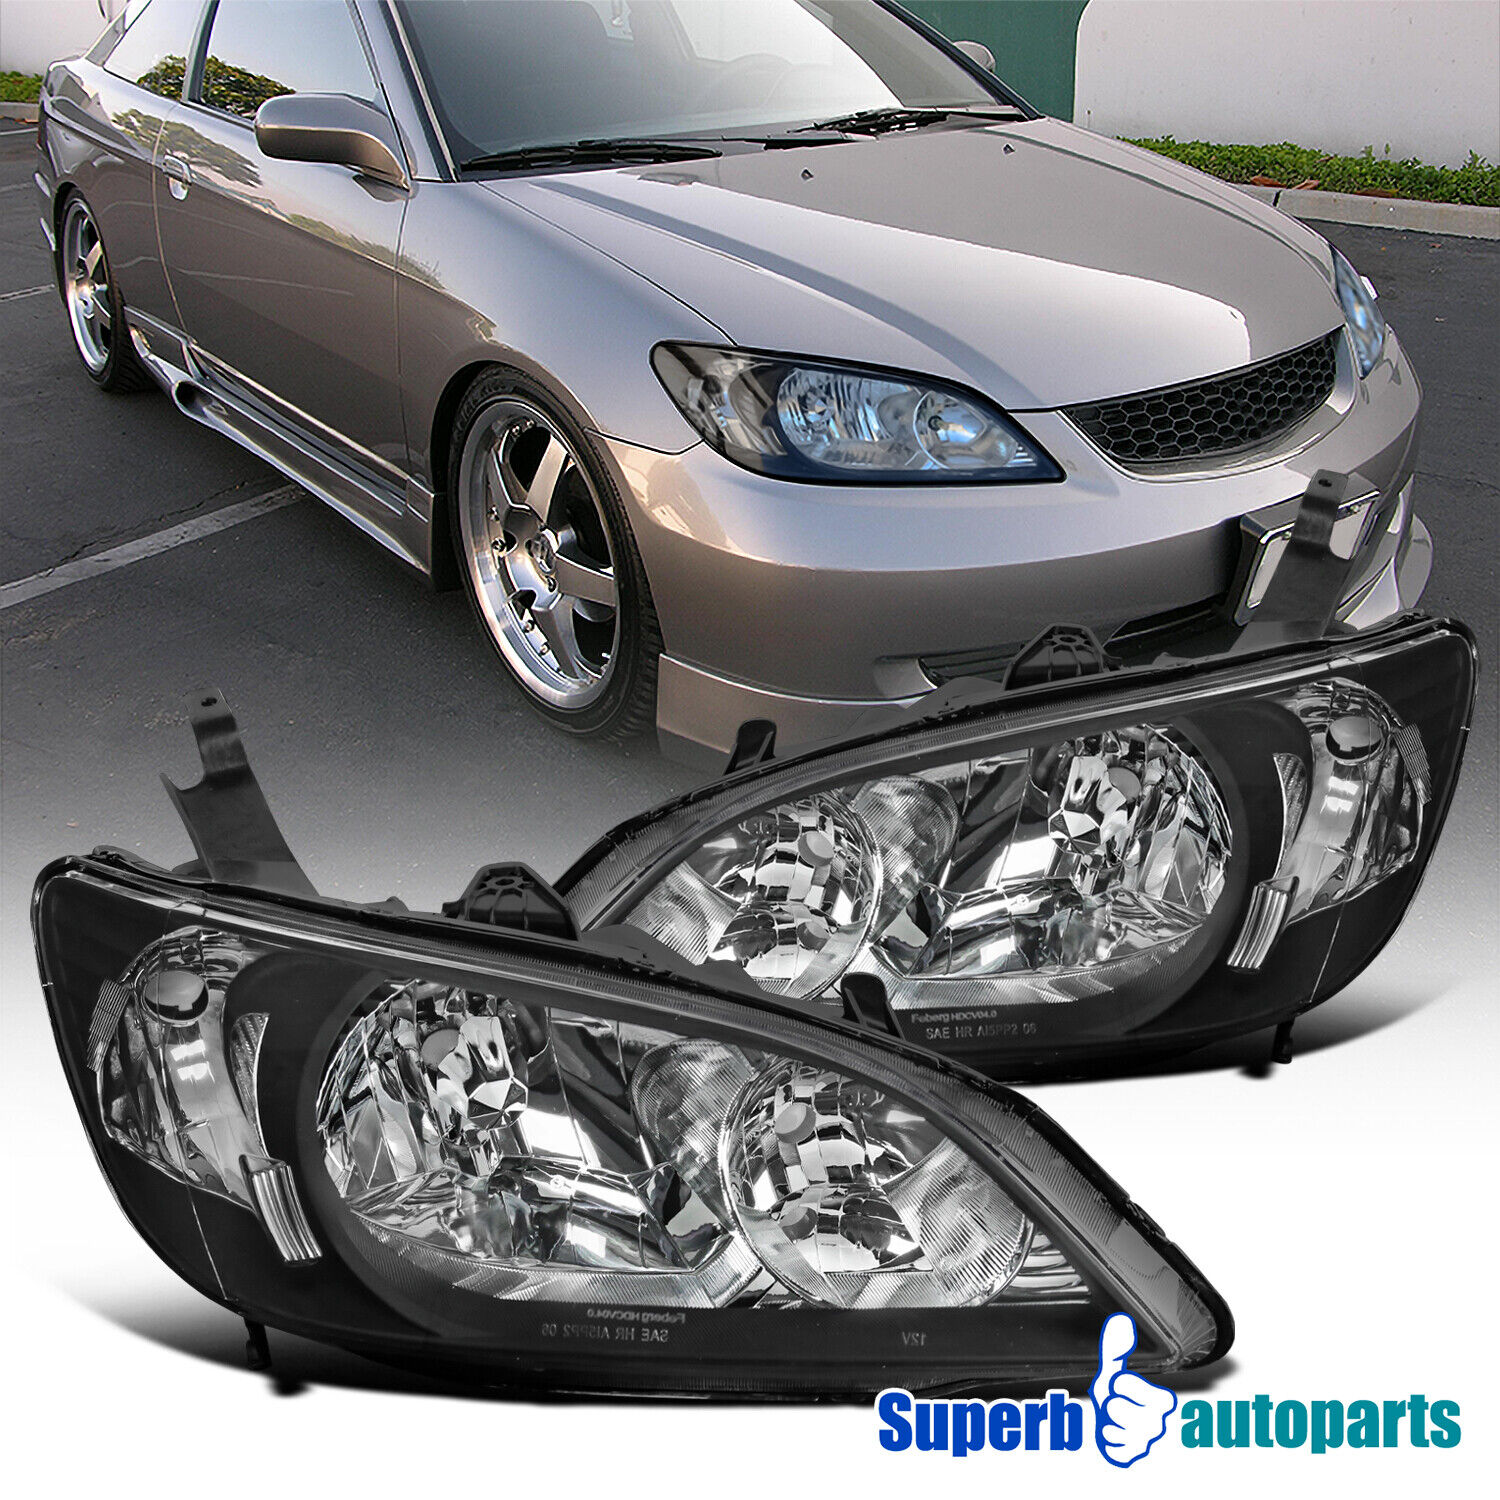 Fits 2004-2005 Hond Civic 2Dr 4Dr Black Headlights Replacement 04-05 Lamps Pair